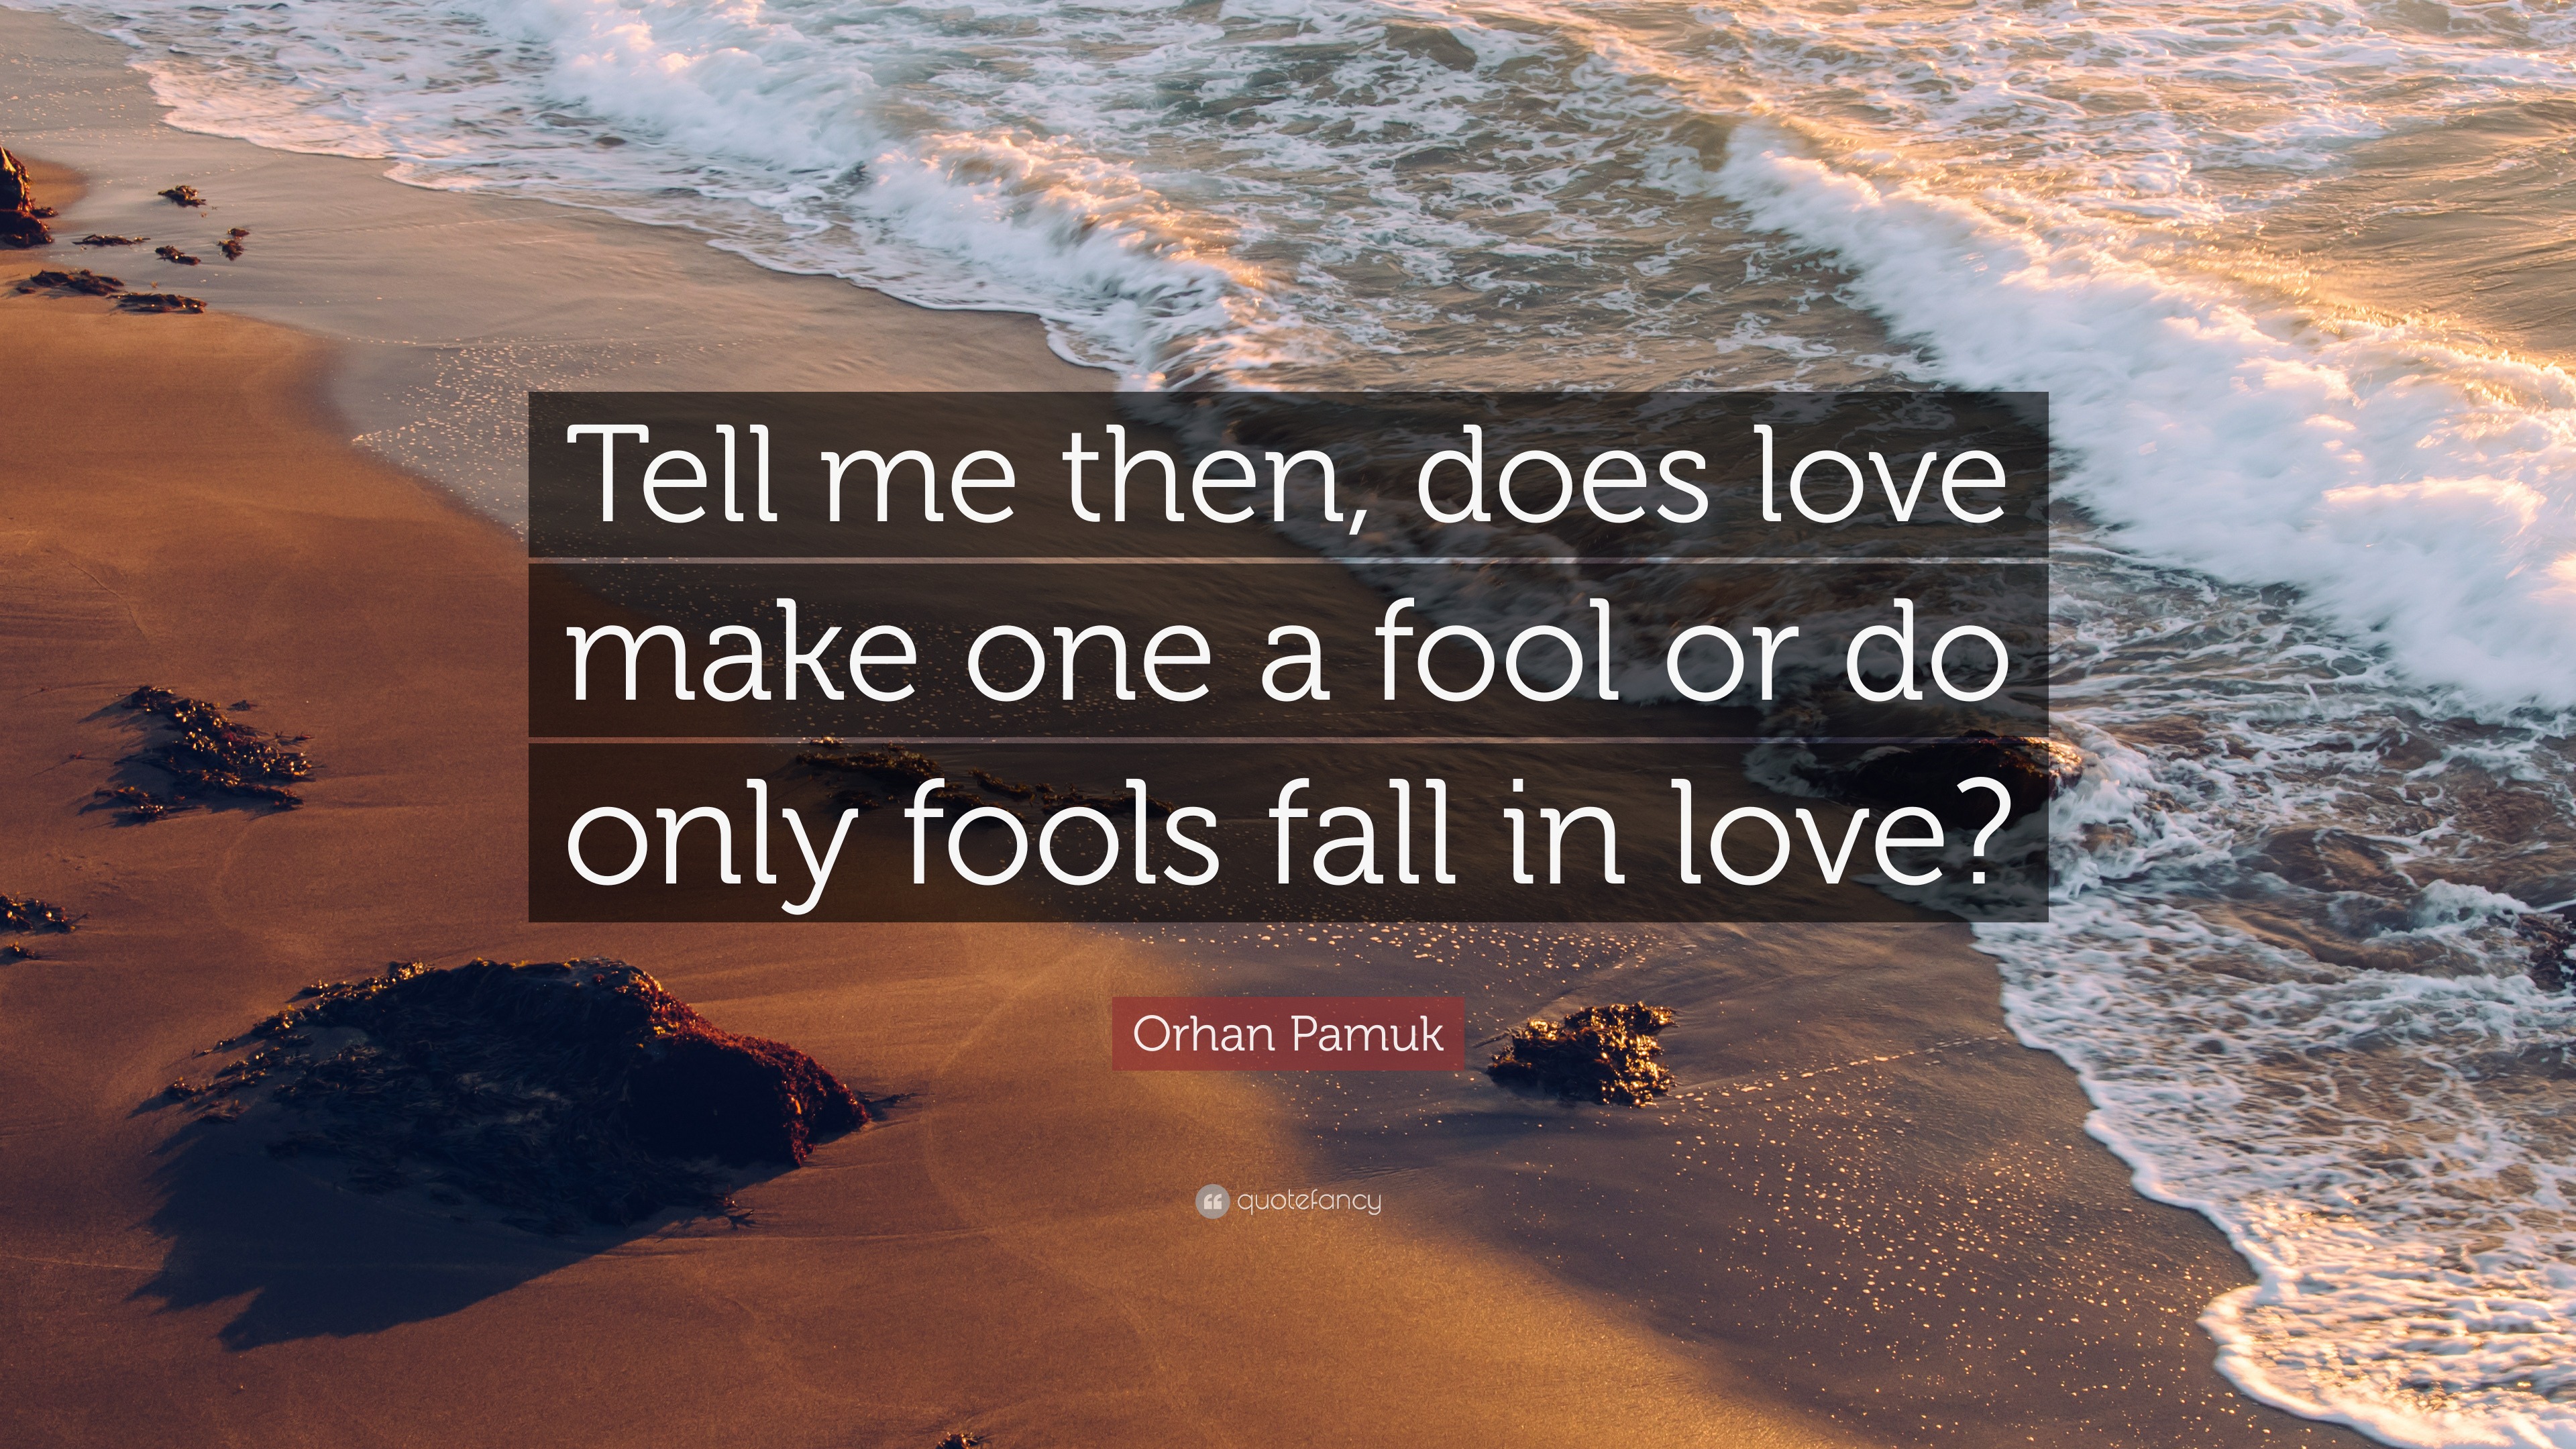 Orhan Pamuk Quote “Tell me then does love make one a fool or